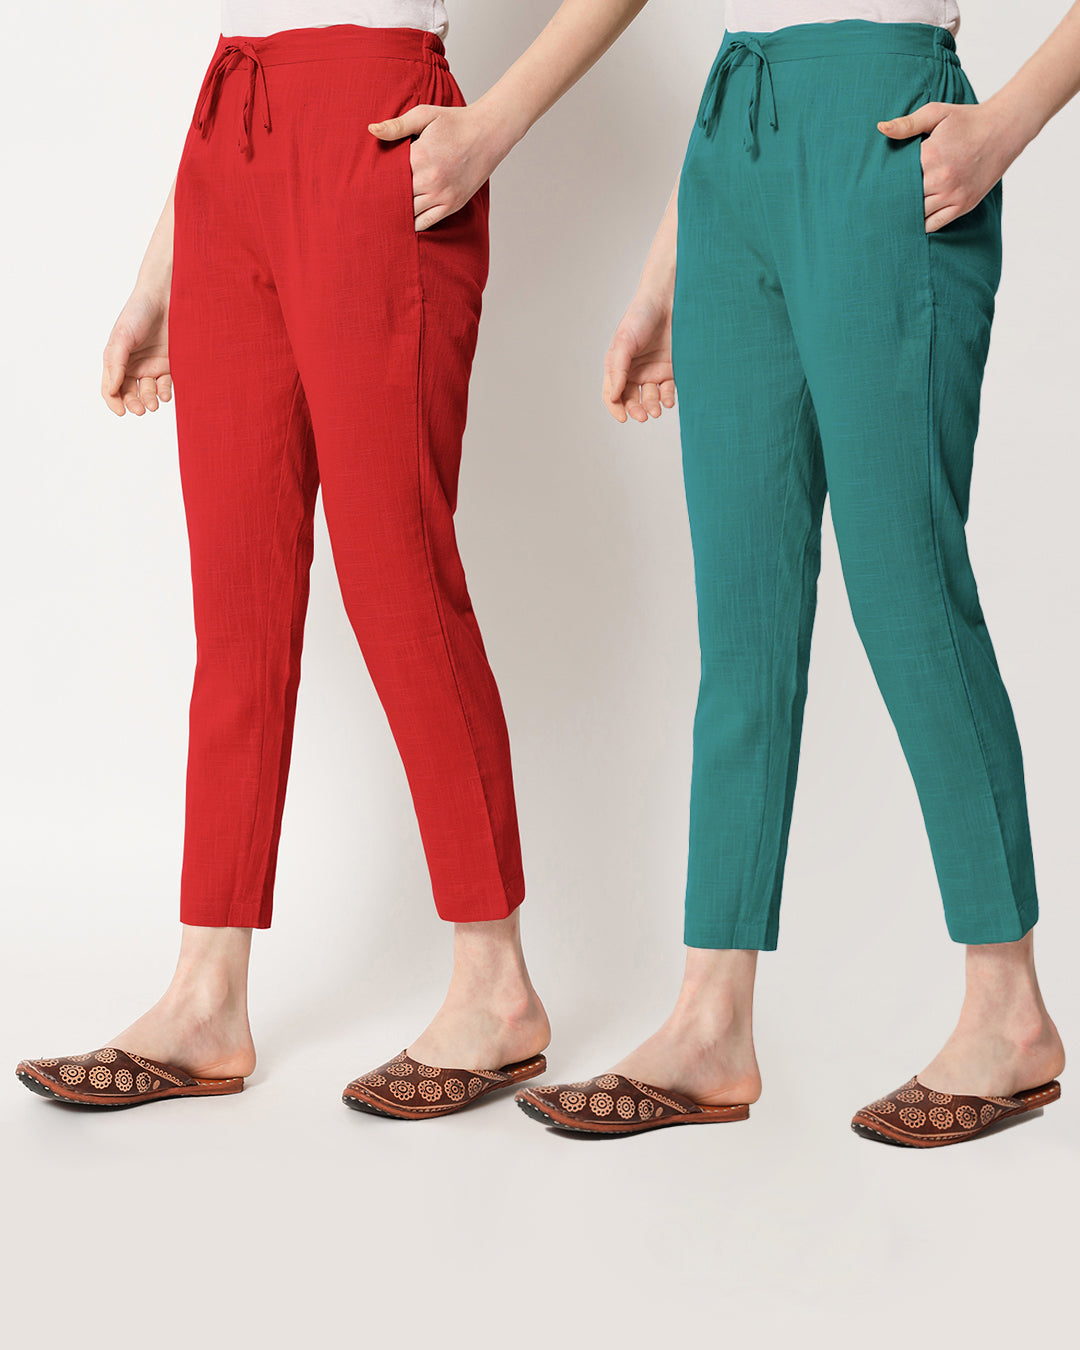 Combo: Classic Red & Forest Green Cigarette Pants- Set of 2